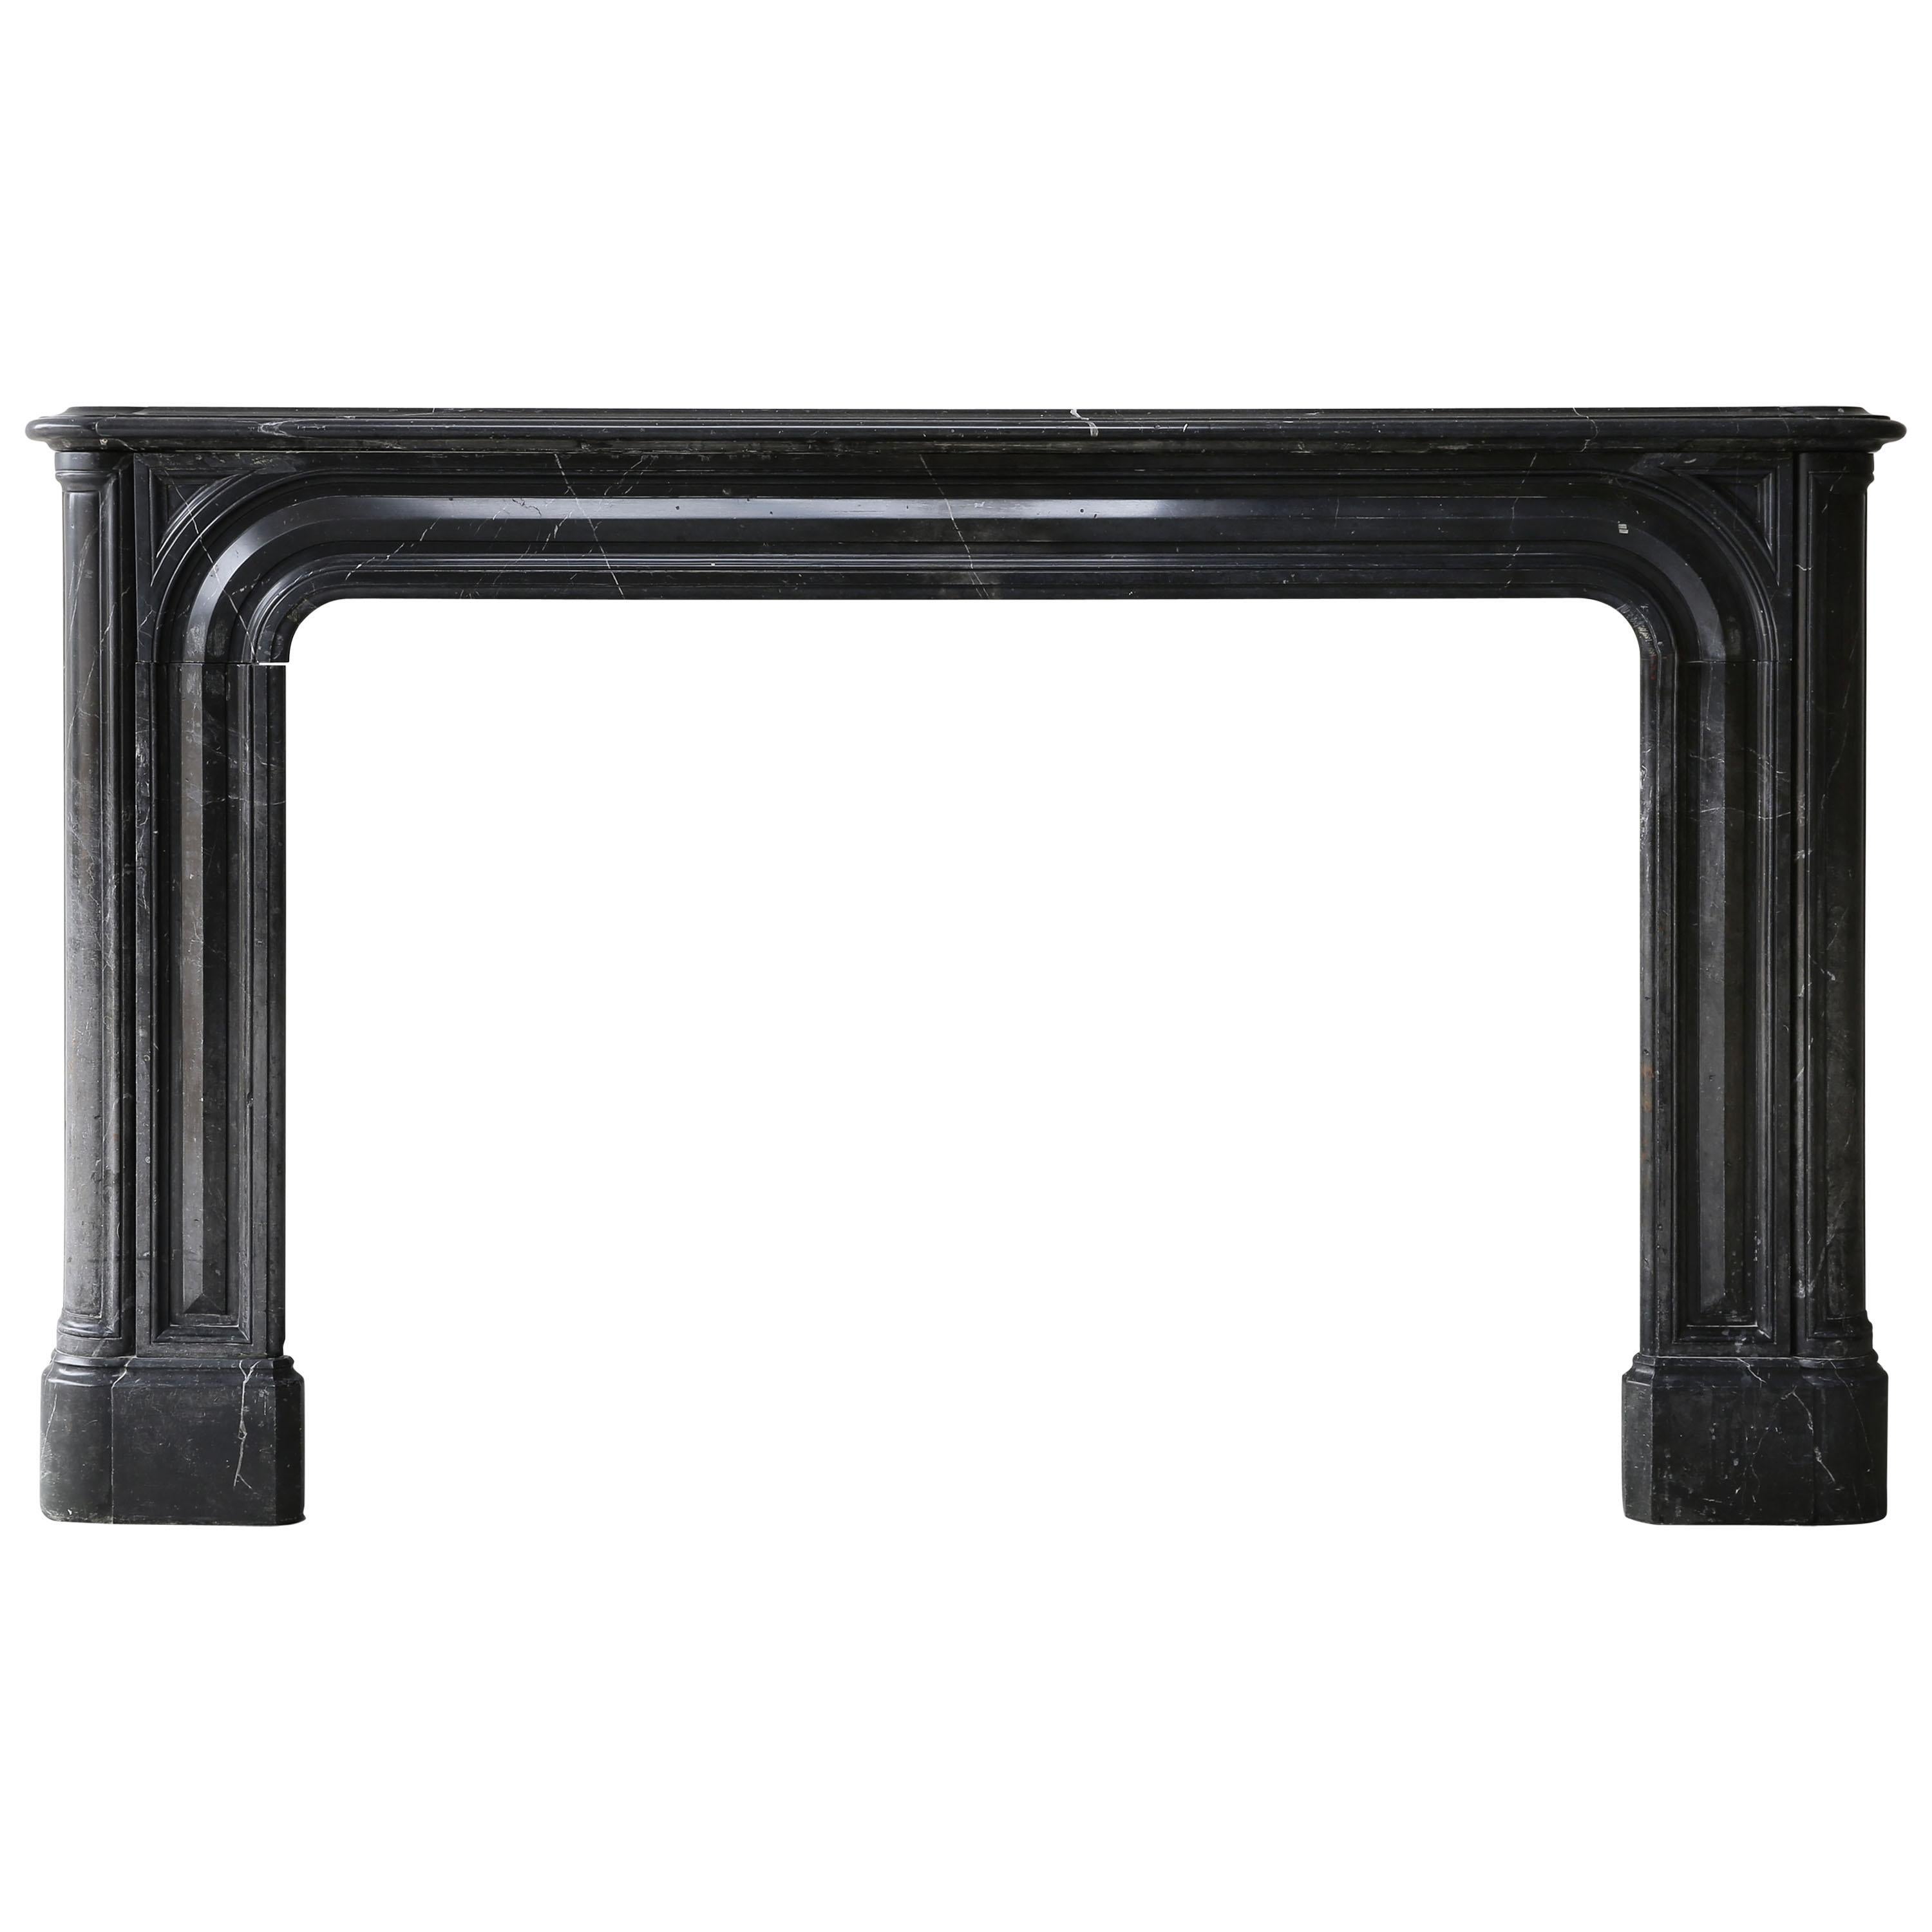 Antique Marble Fireplace of Nero Marquita Marble, 19th Century, Louis XIV Style For Sale